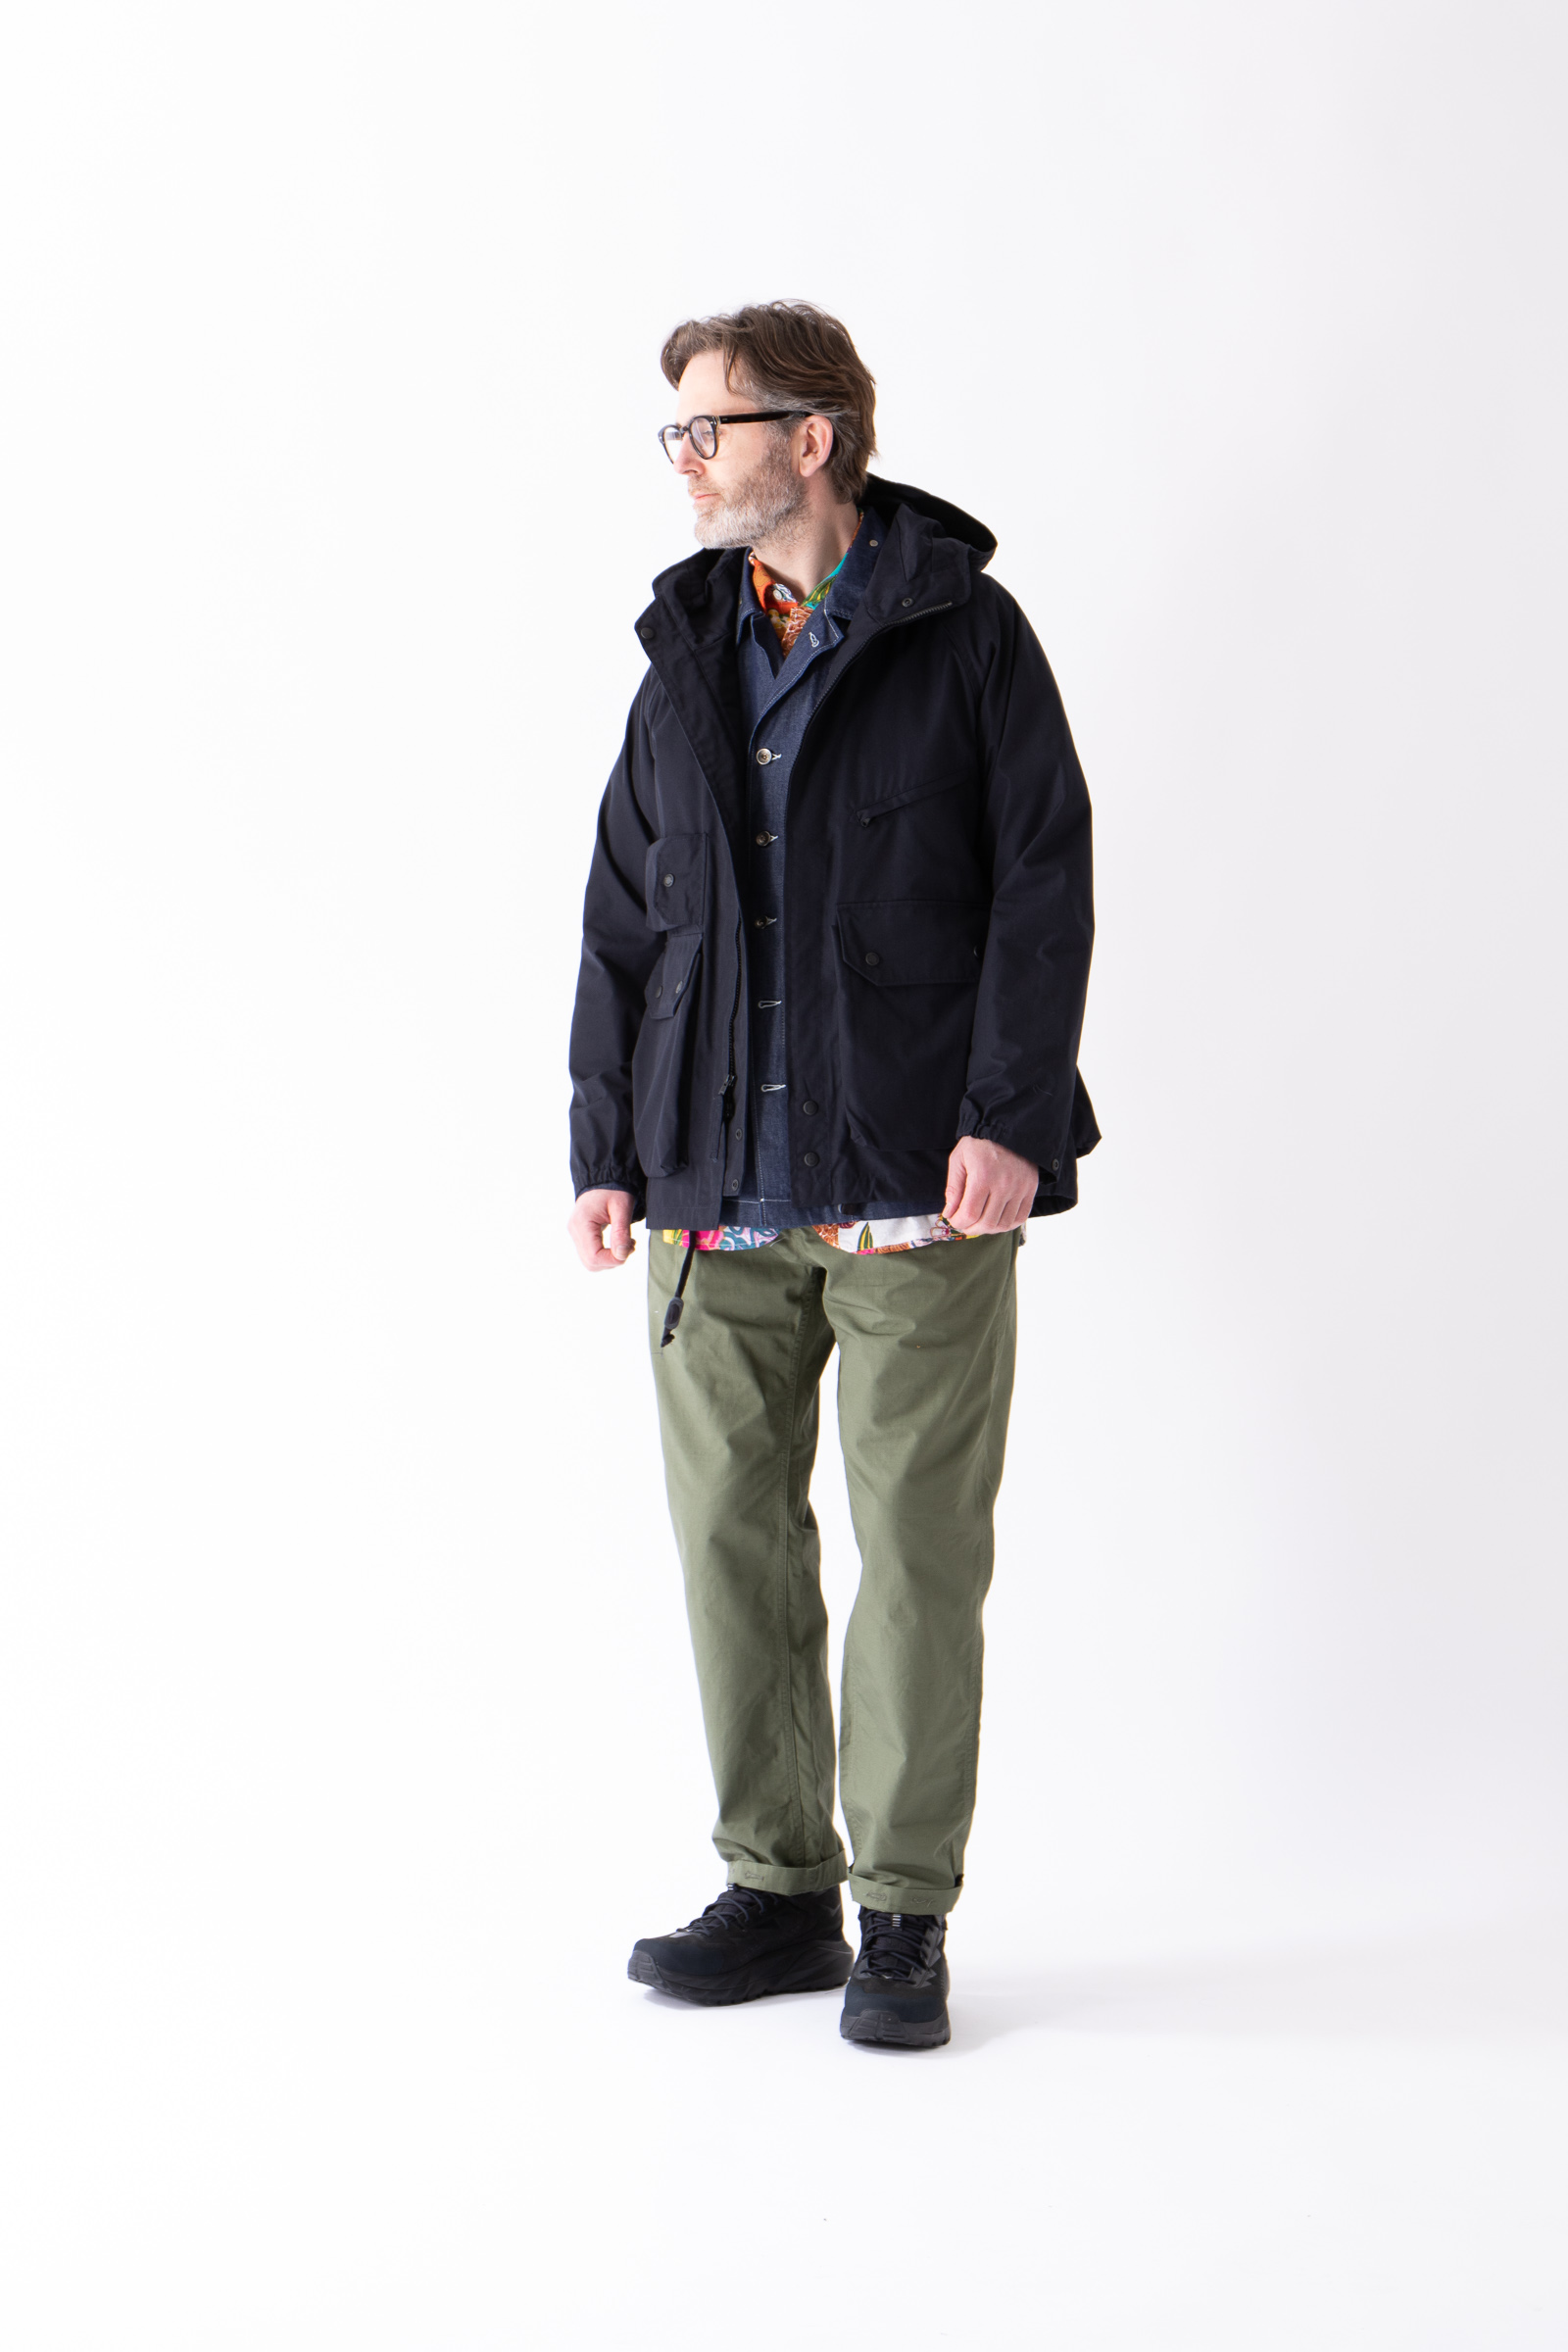 ENGINEERED GARMENTS SS21 DELIVERY 1 - The Bureau Belfast